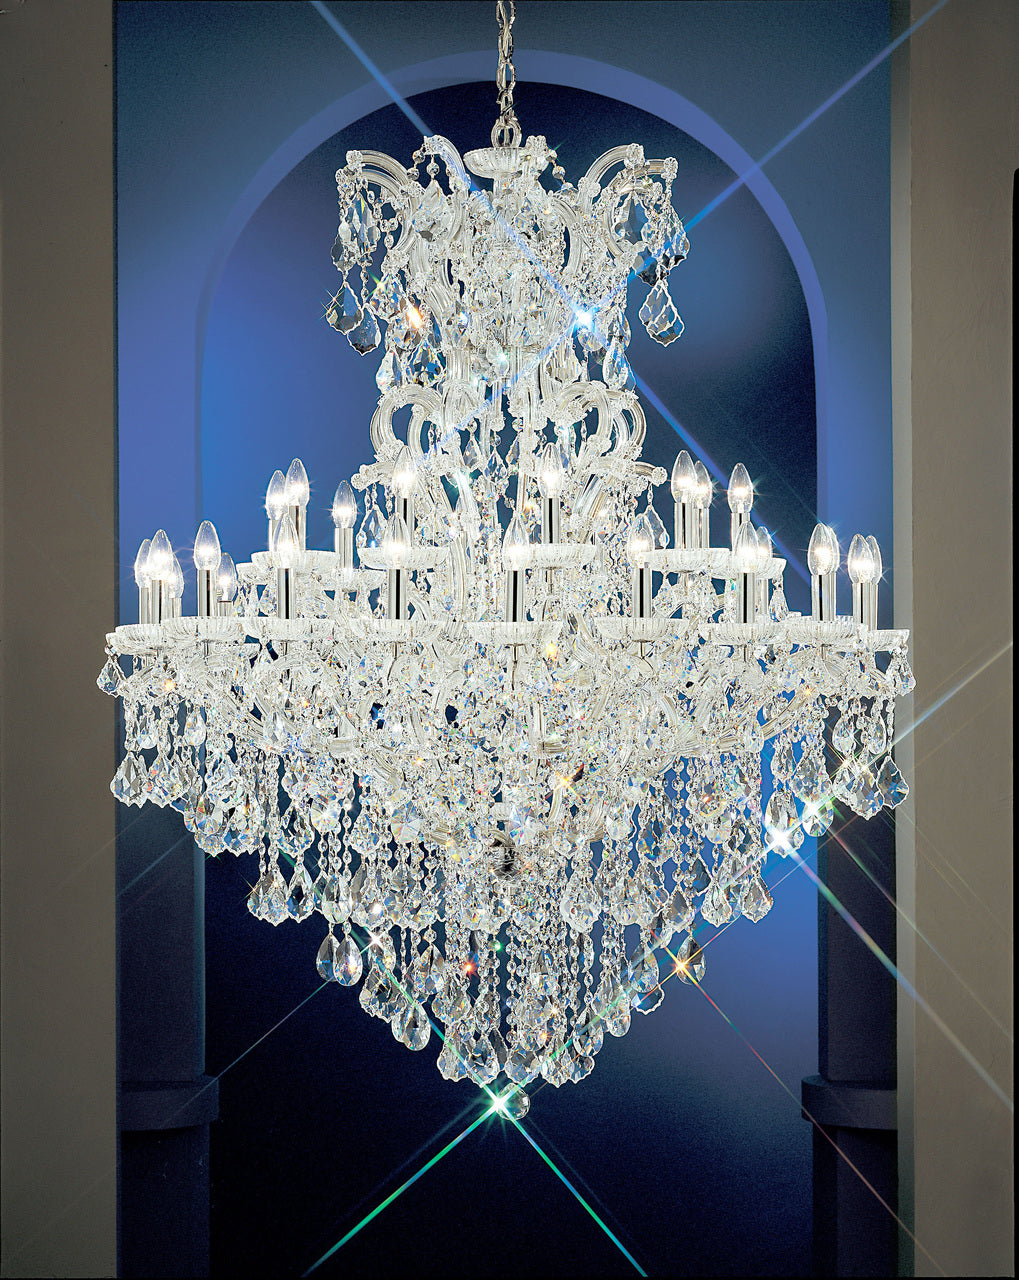 Classic Lighting 8137 OWG S Maria Theresa Traditional Crystal Chandelier in Olde World Gold (Imported from Italy)